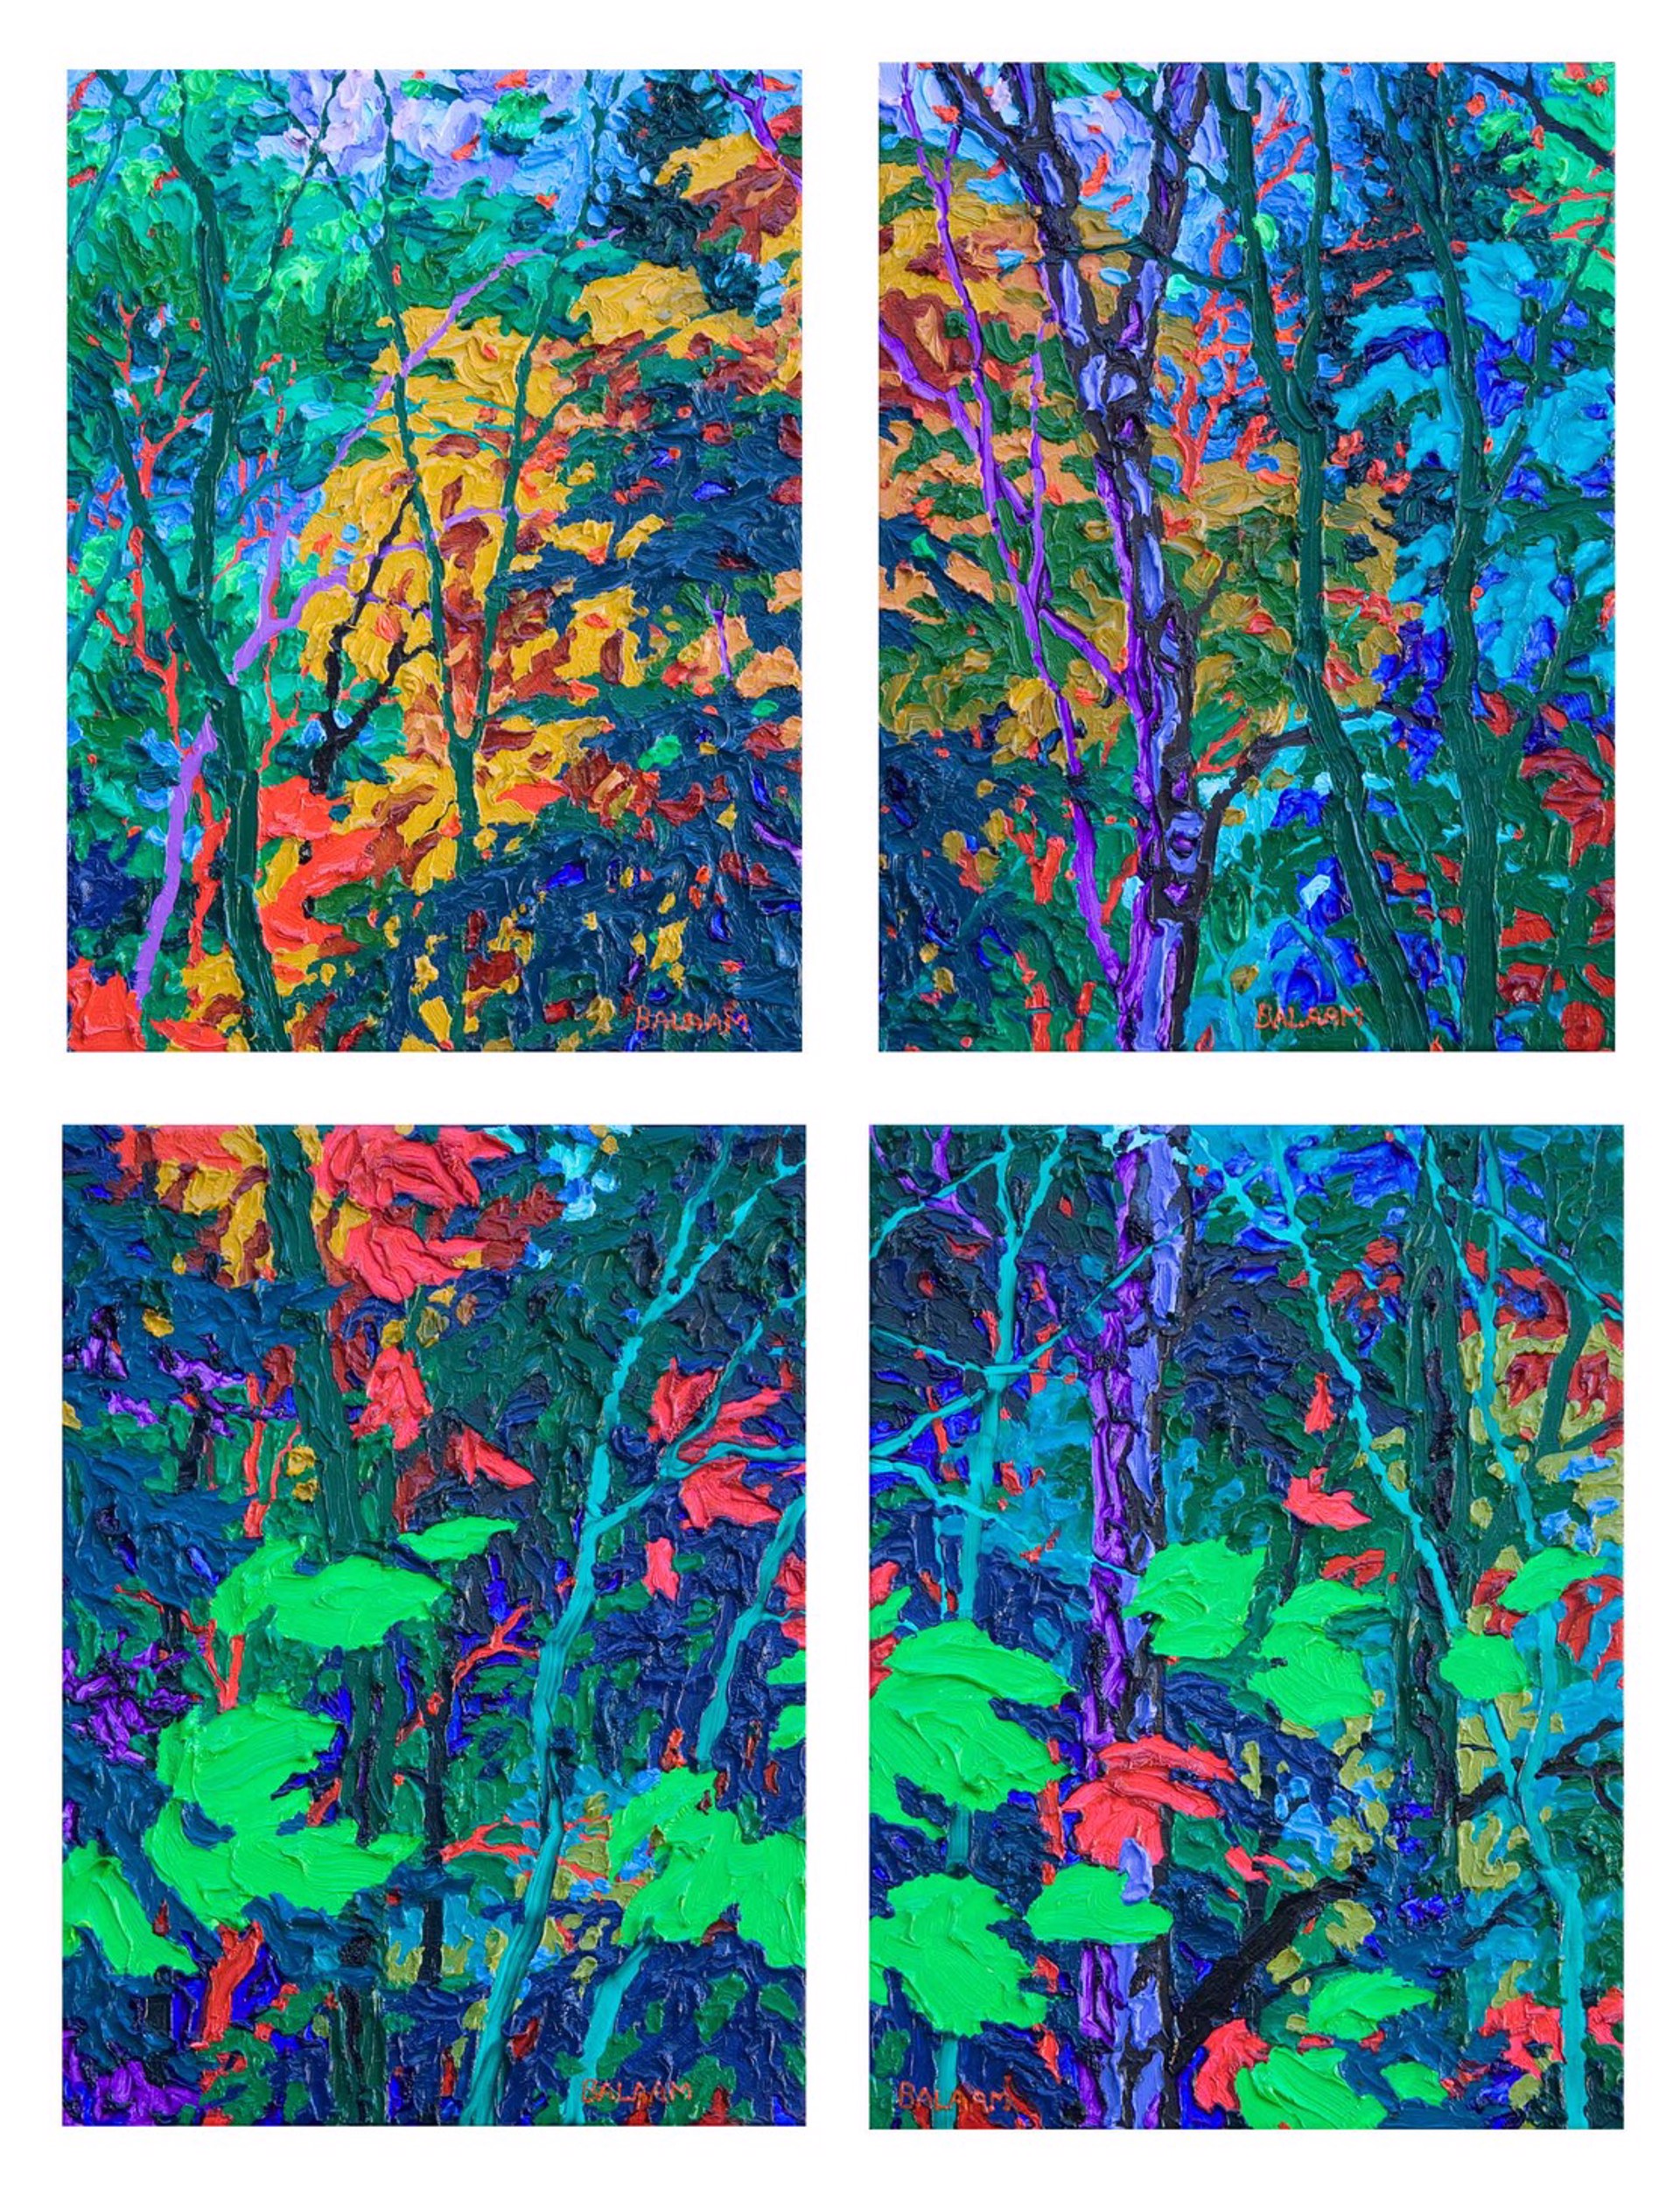 Gem - Moonlight in the Forest I,II,III,IV by Frank Balaam